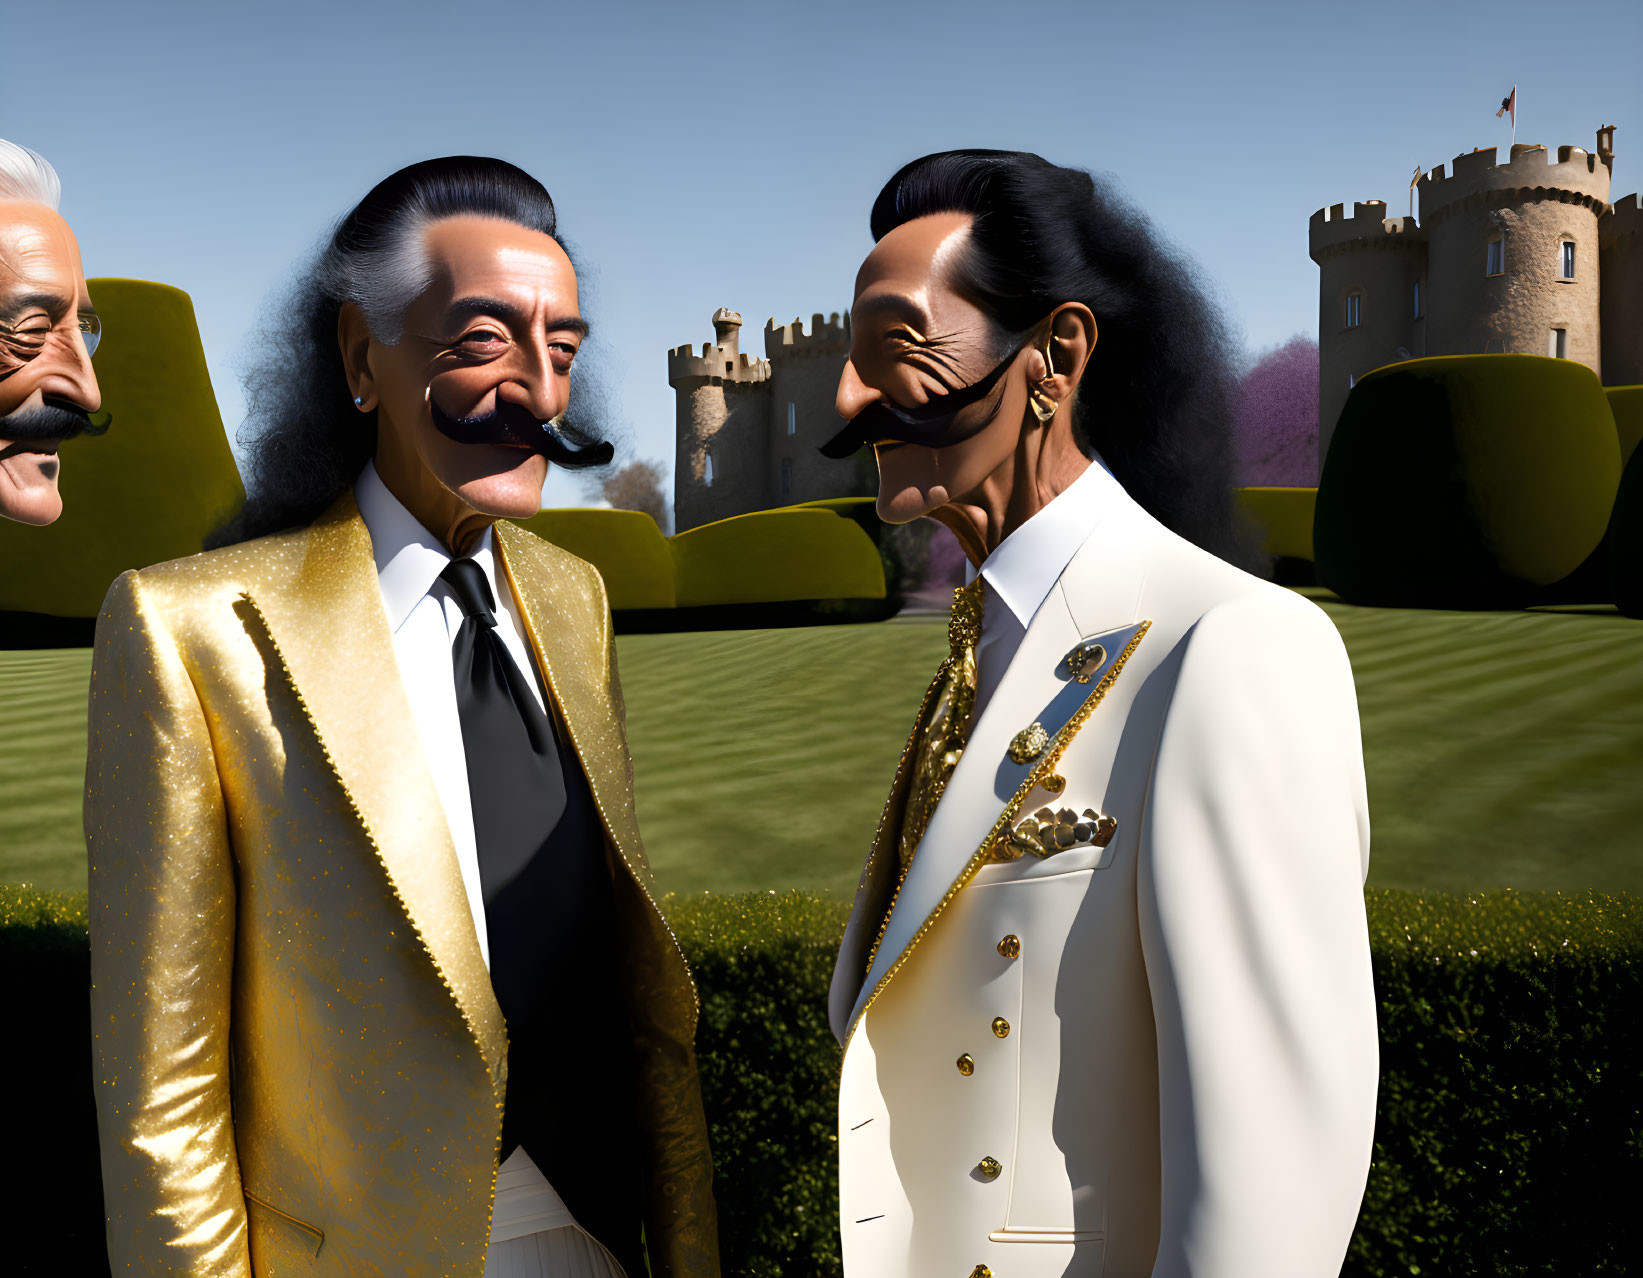 The Dali Brothers 7